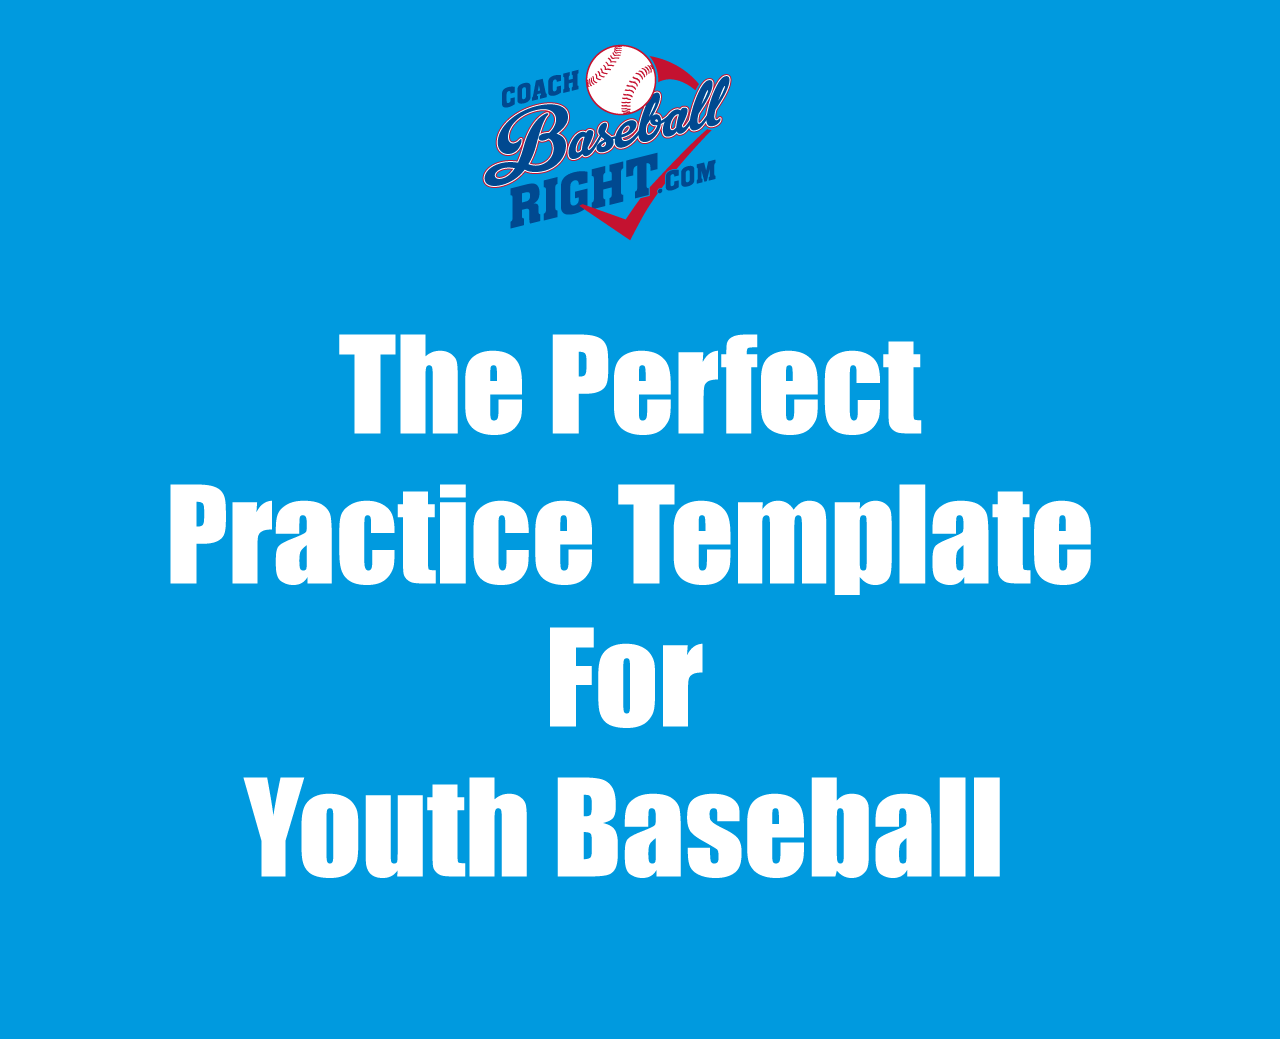 The Perfect Practice Template for Youth Baseball